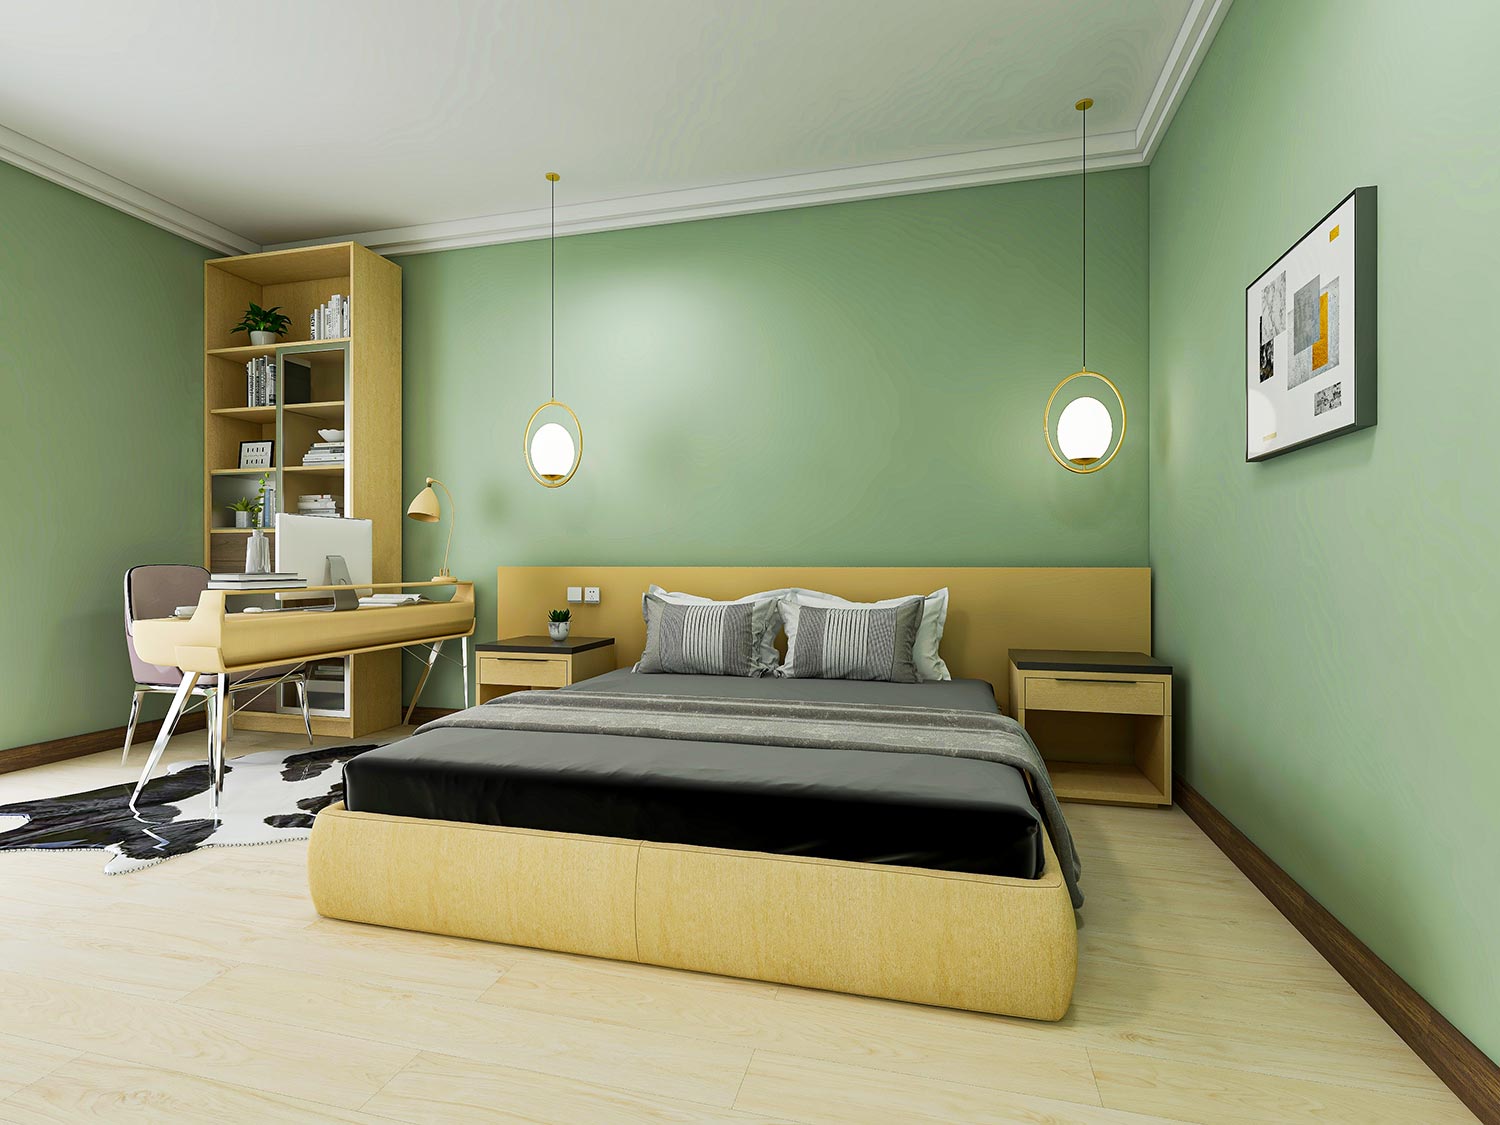 Elegant and spacious bedroom design of modern apartment, overcoat cabinet beside the big bed, with dressing table